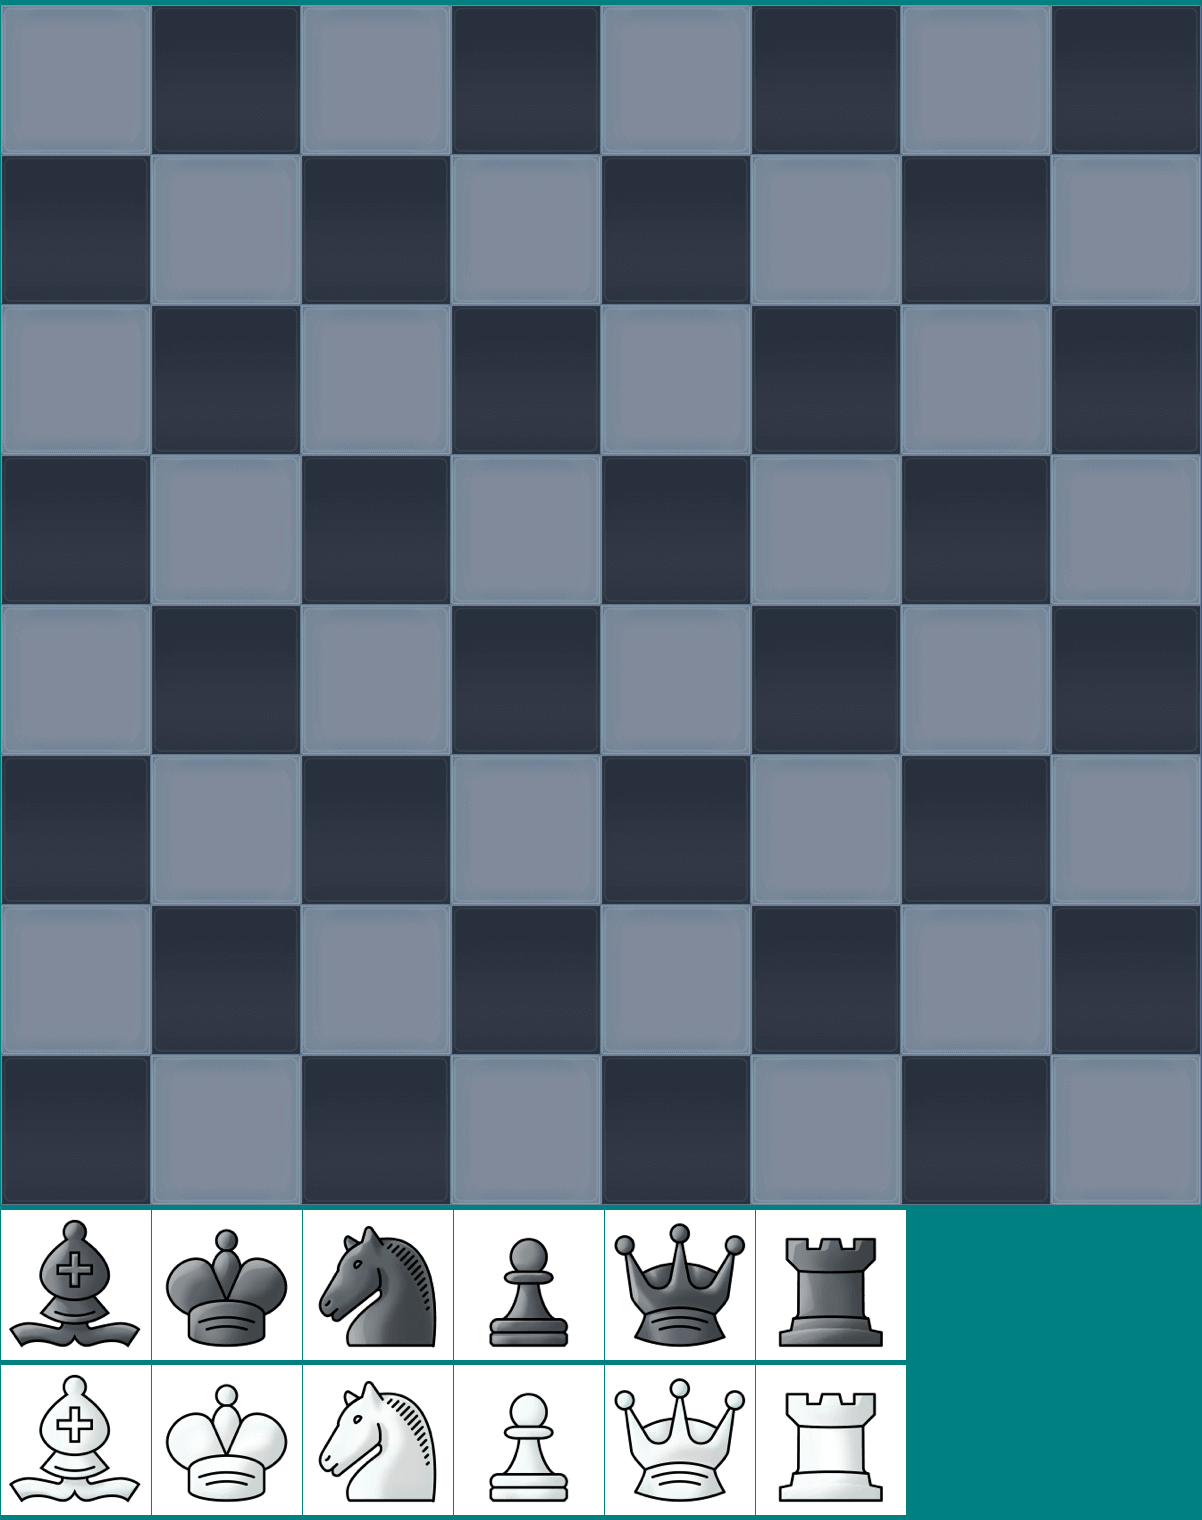 Chess - Board and Chess Pieces (Glass)